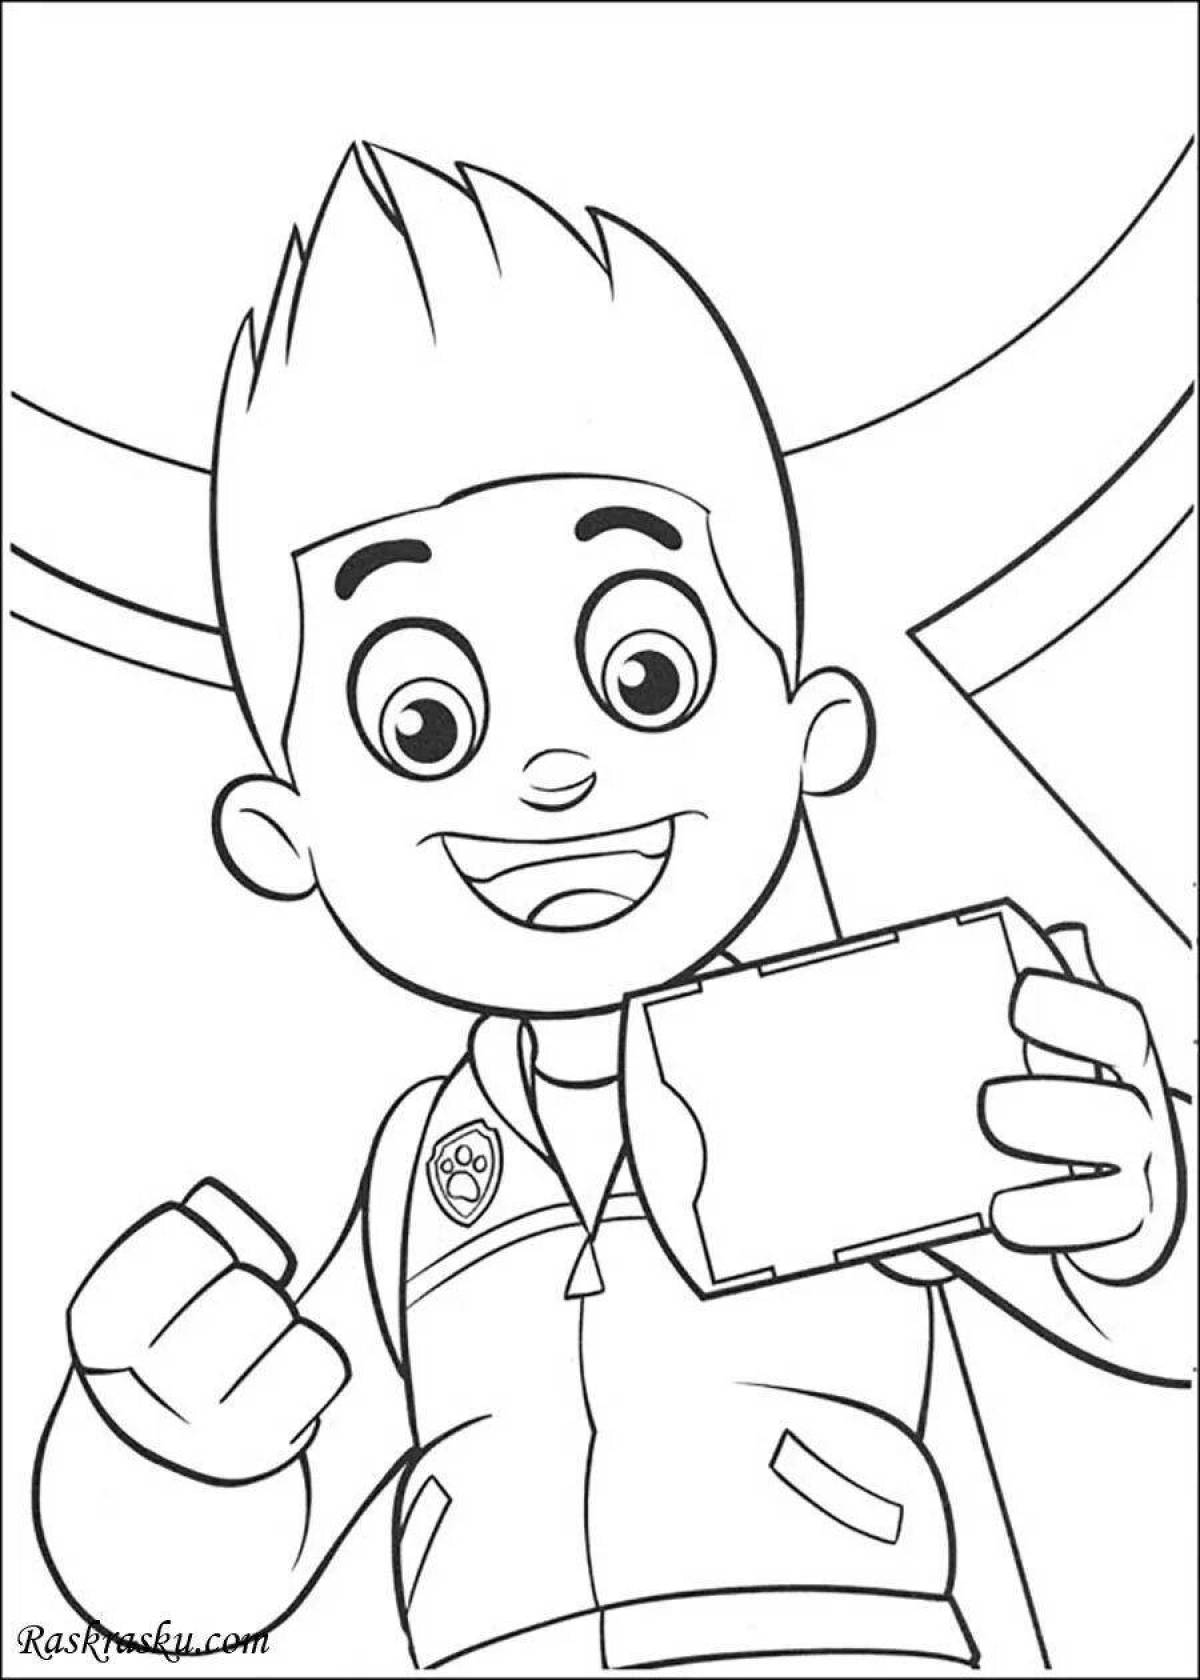 Great rider coloring page